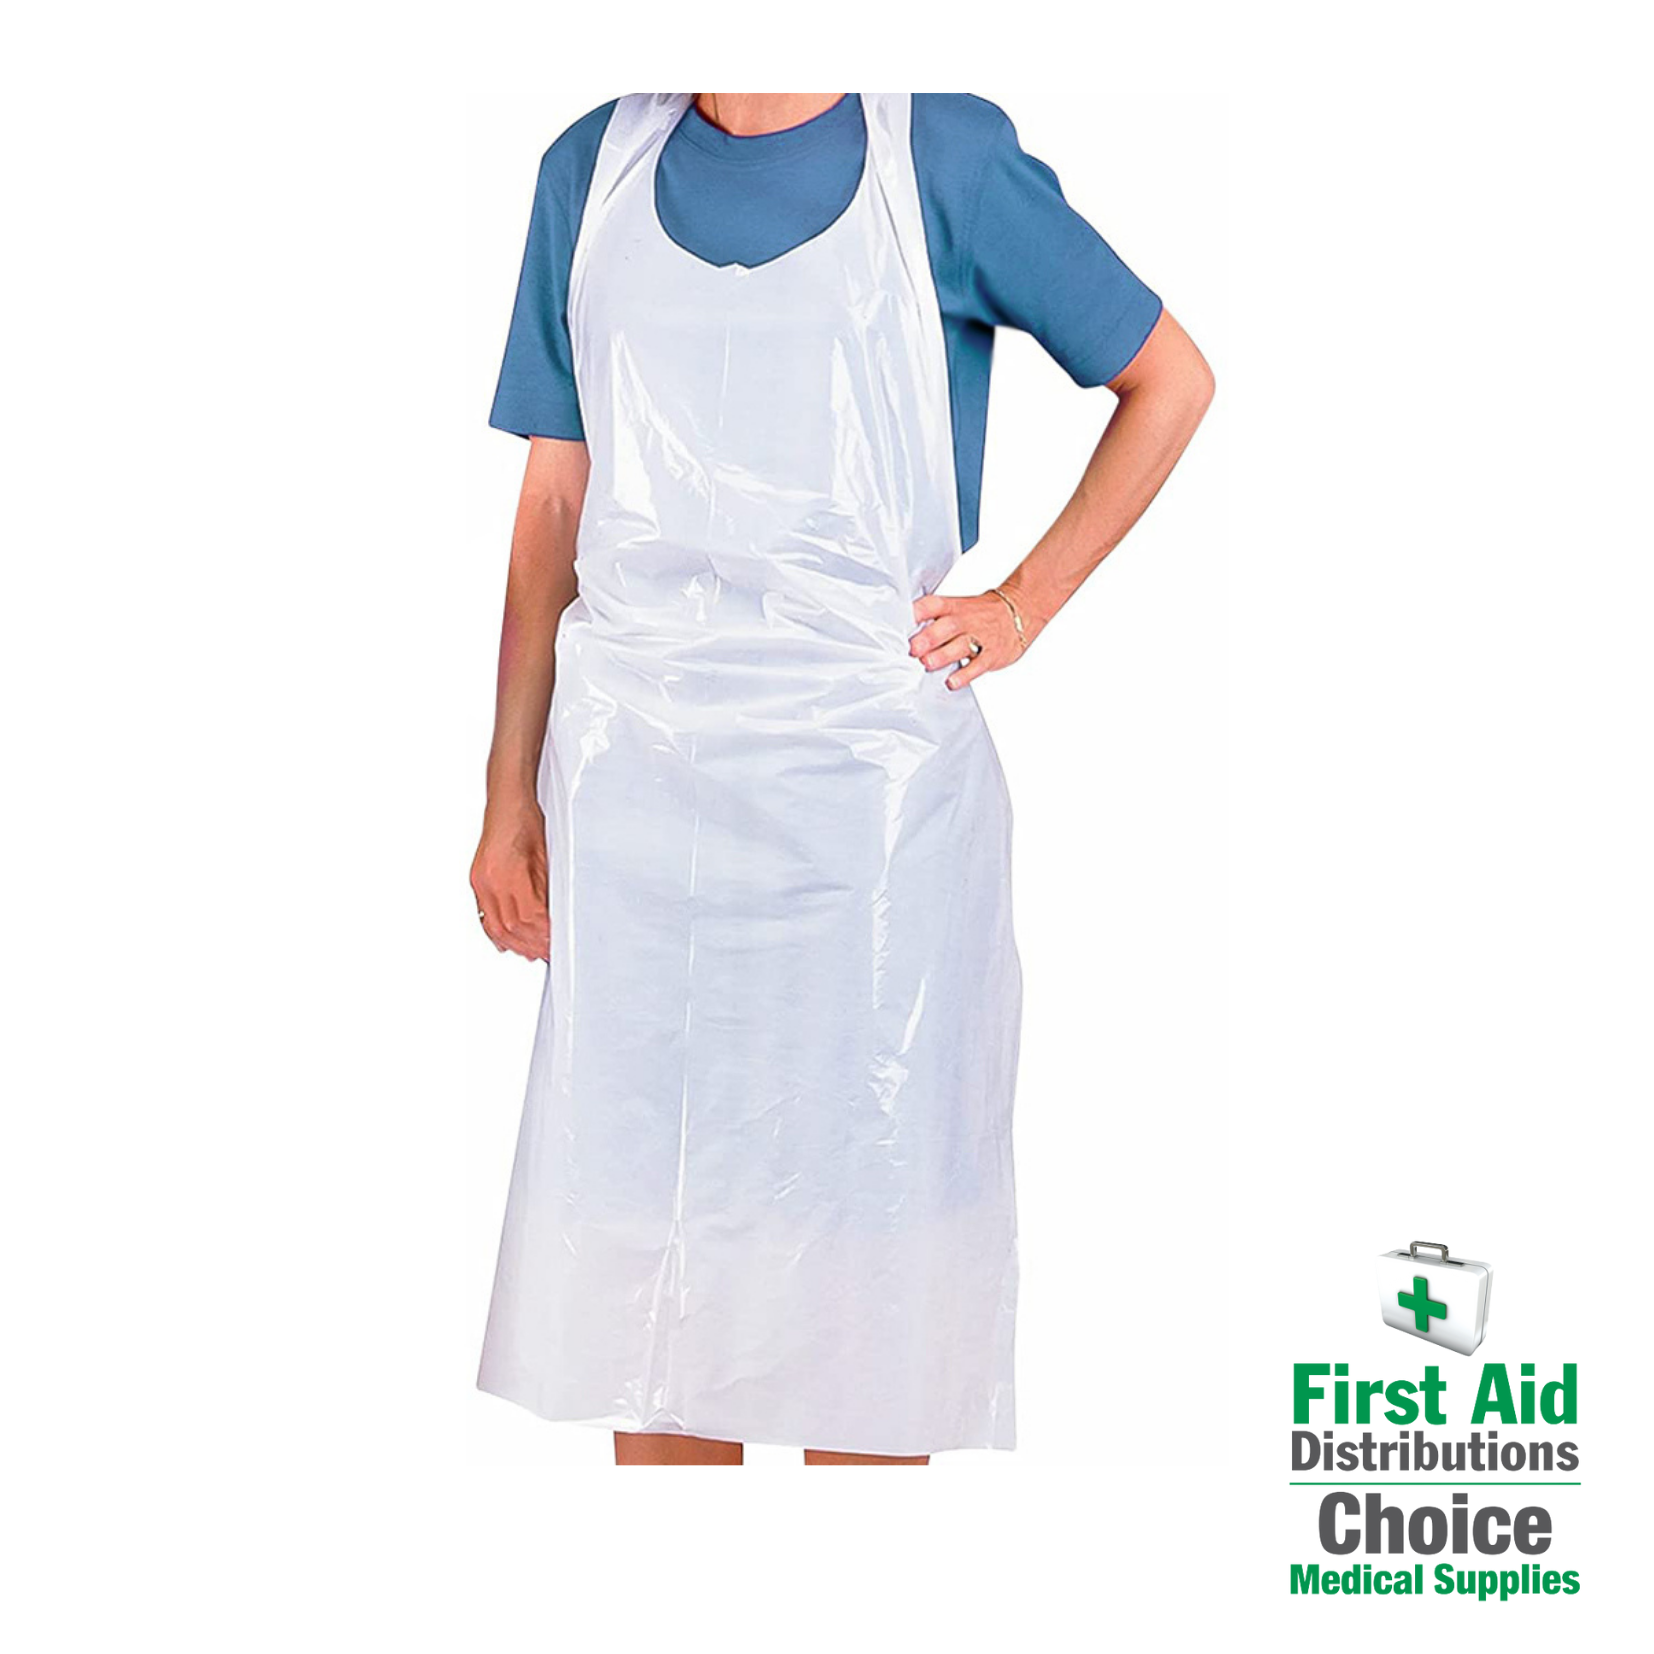 collections/Disposable_Apron_First_Aid_Distributions.png